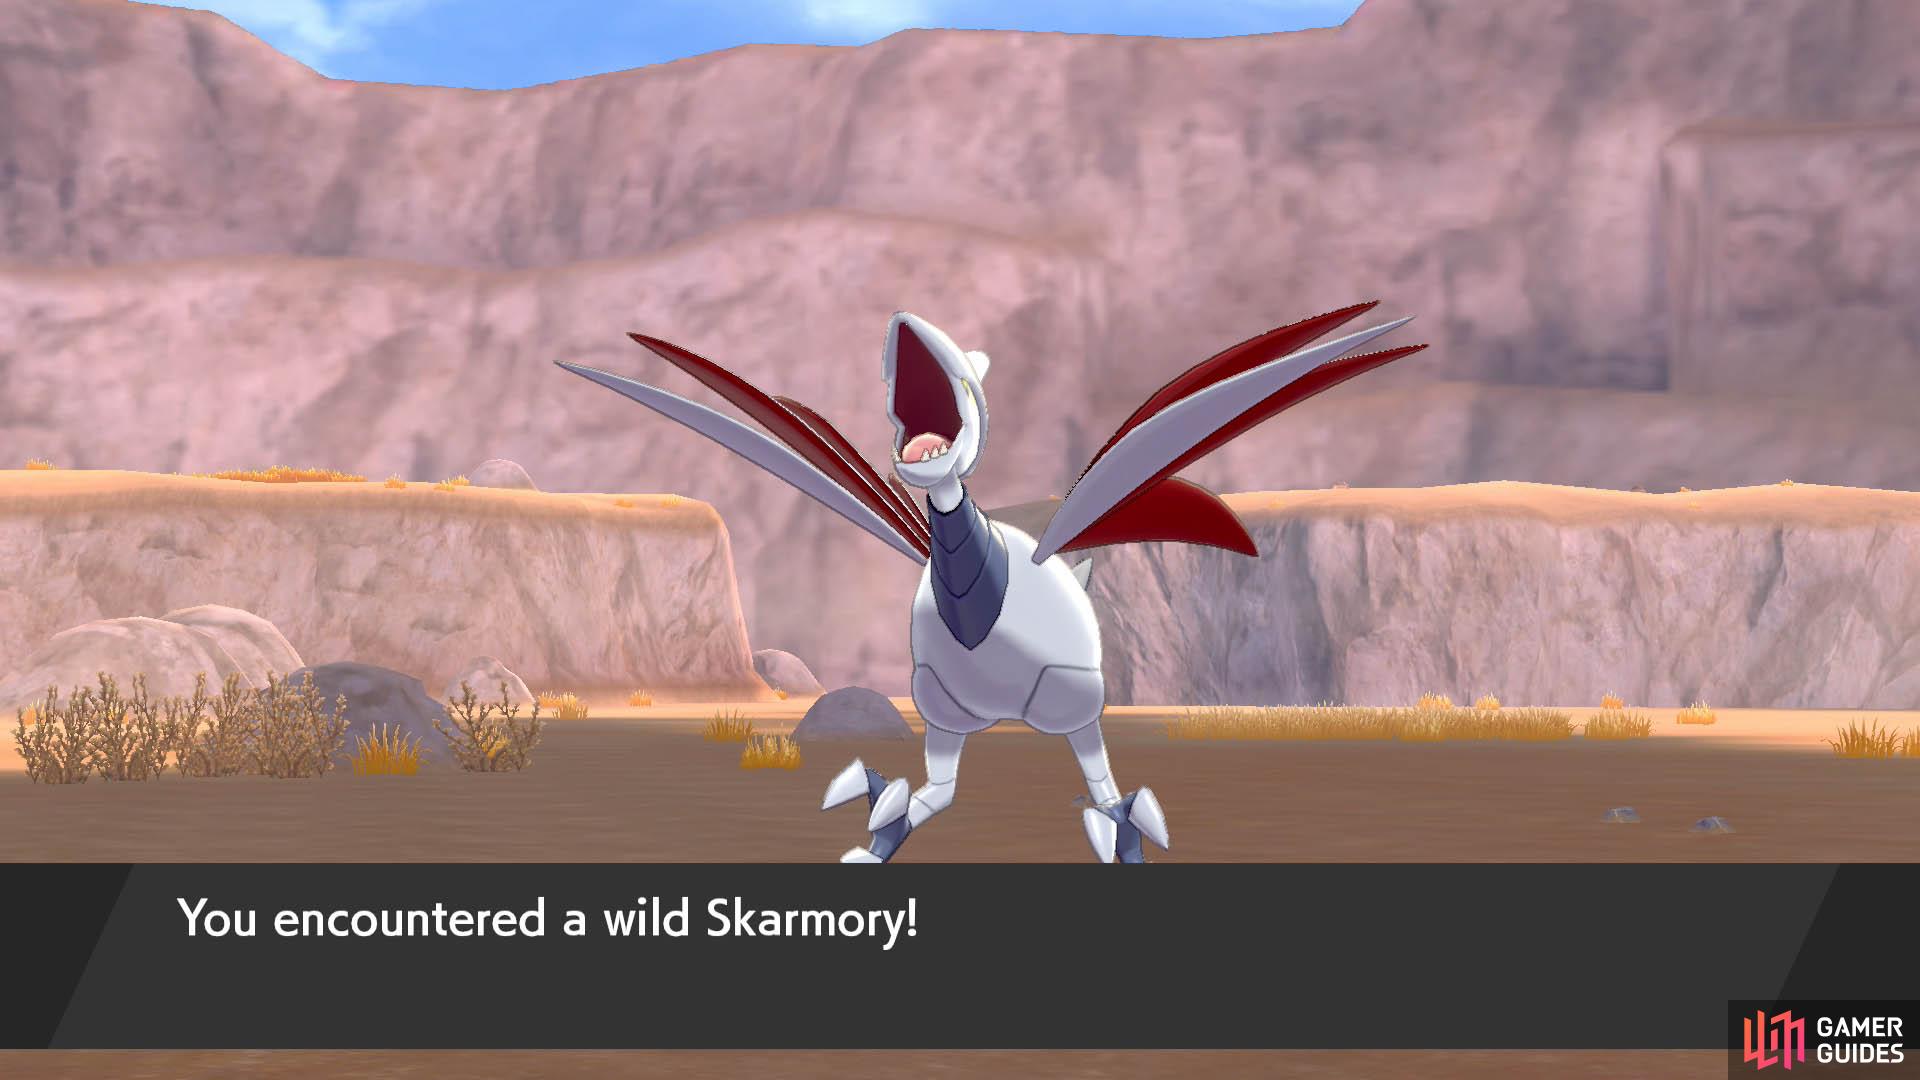 Skarmory is a solid team choice, best suited as a physical tank.